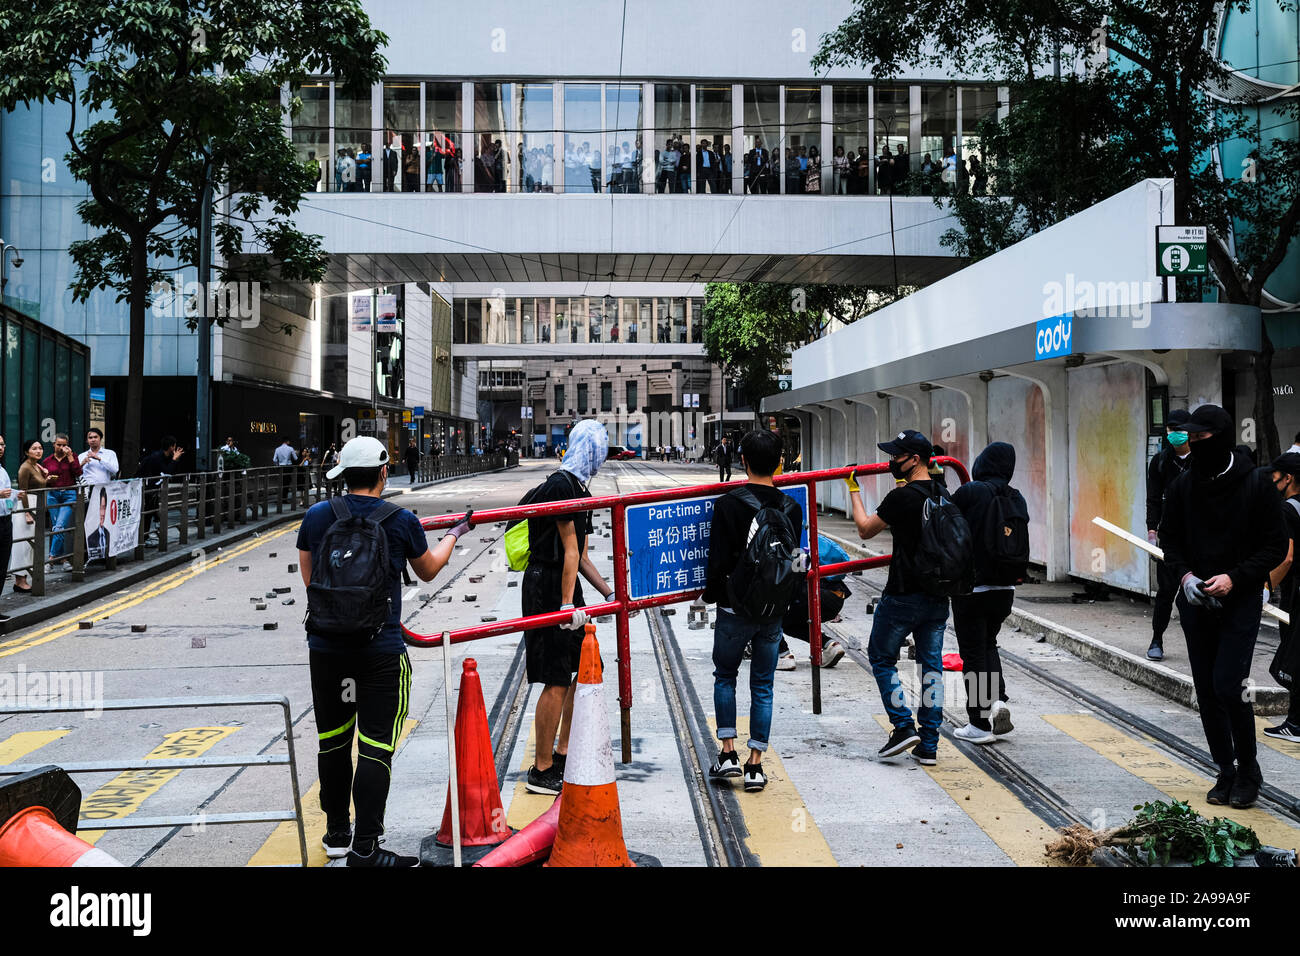 Hong Kong, China. 13th Nov, 2019. Protesters set up barricades and block streets during a protest in the Central district Hong Kong. A 'Blossom Everywhere' action was organized by the protestors to paralyze traffic and vandalize things across Hong Kong for its third consecutive days and have sparked some of the worst violence in five months of unrest. Credit: SOPA Images Limited/Alamy Live News Stock Photo